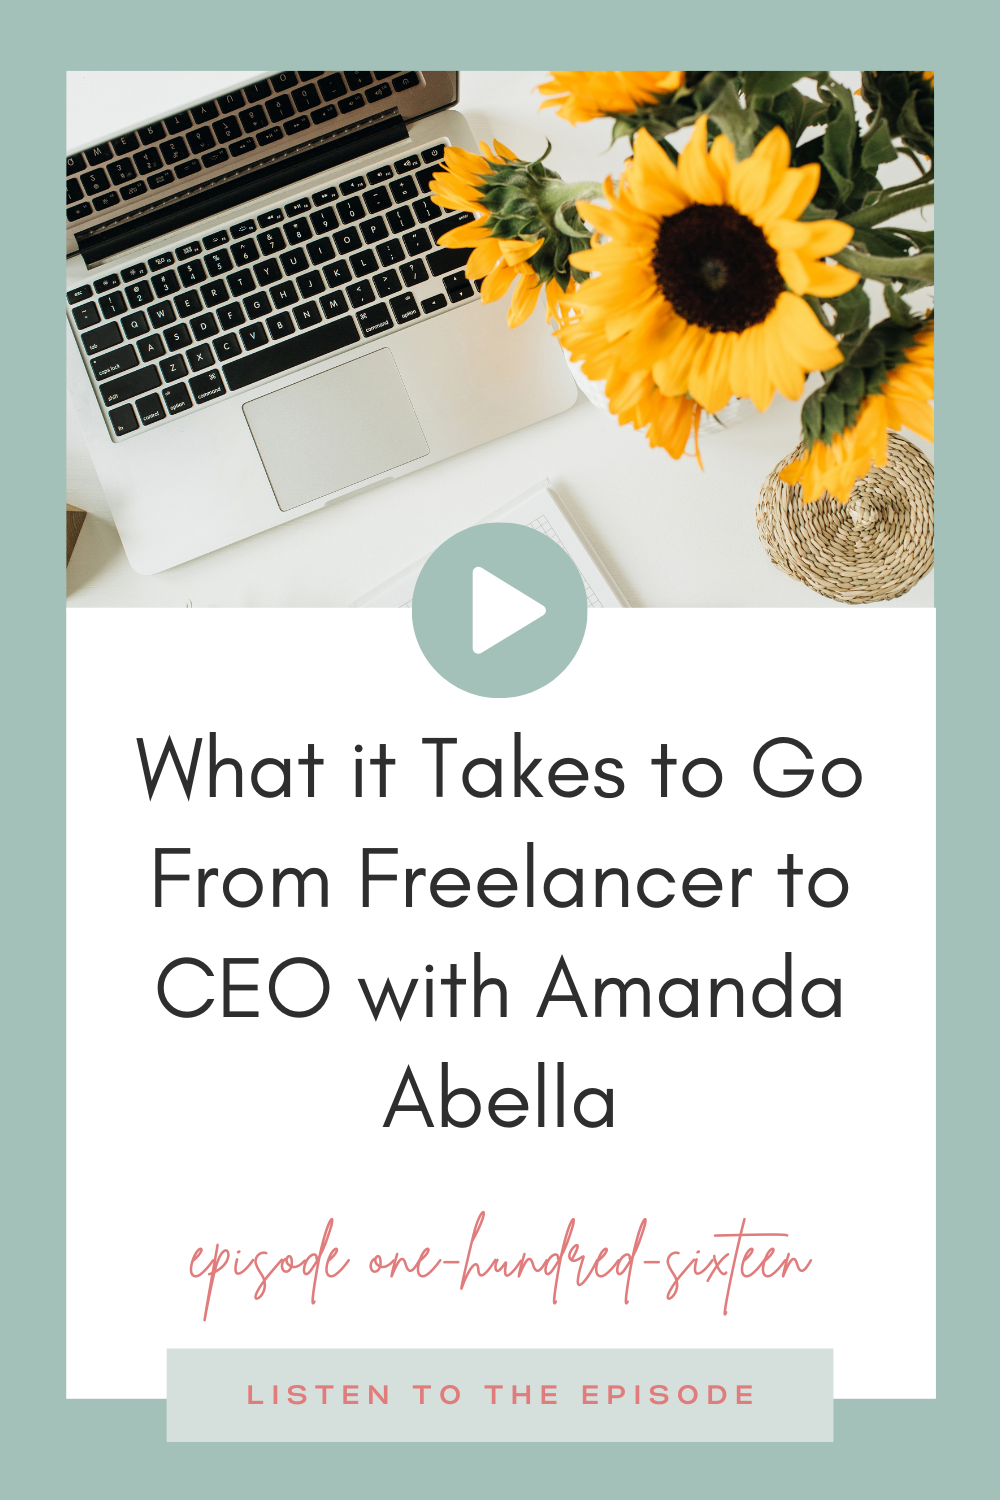 What it Takes to Go From Freelancer to CEO with Amanda Abella